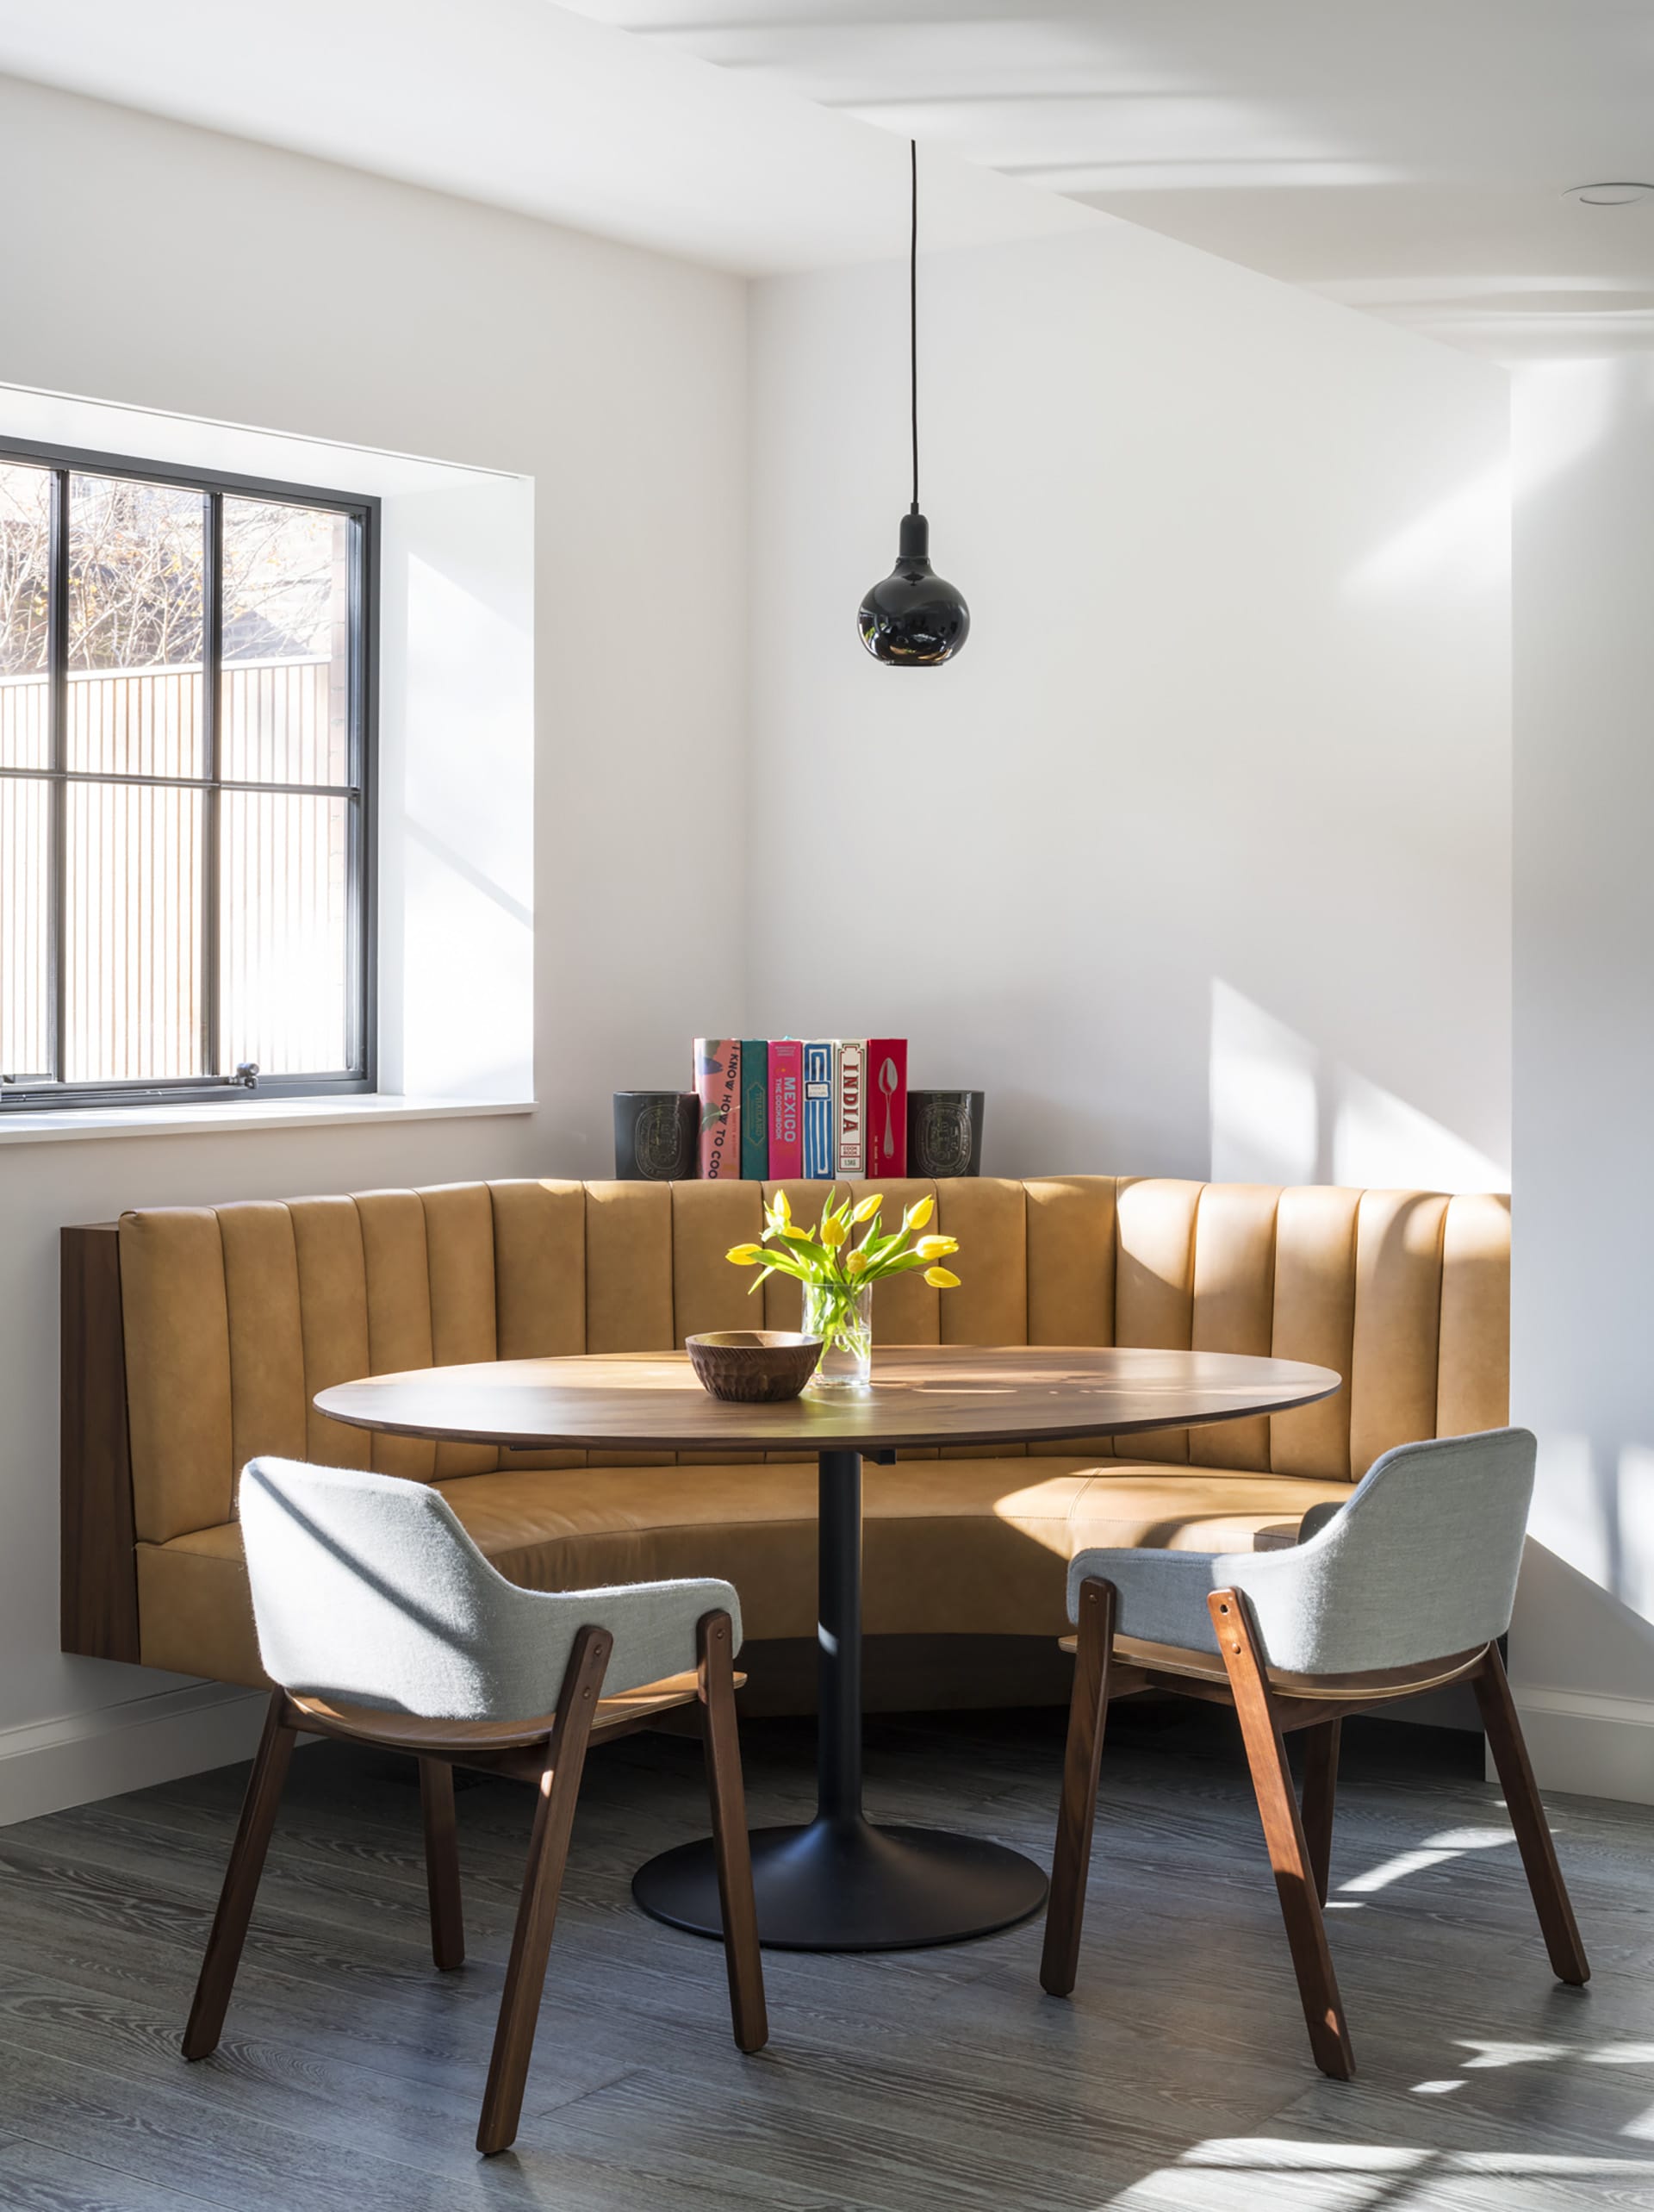 Leather banquette with two grey chairs and a black pendant light in the garden apartment of a Brooklyn Heights townhouse